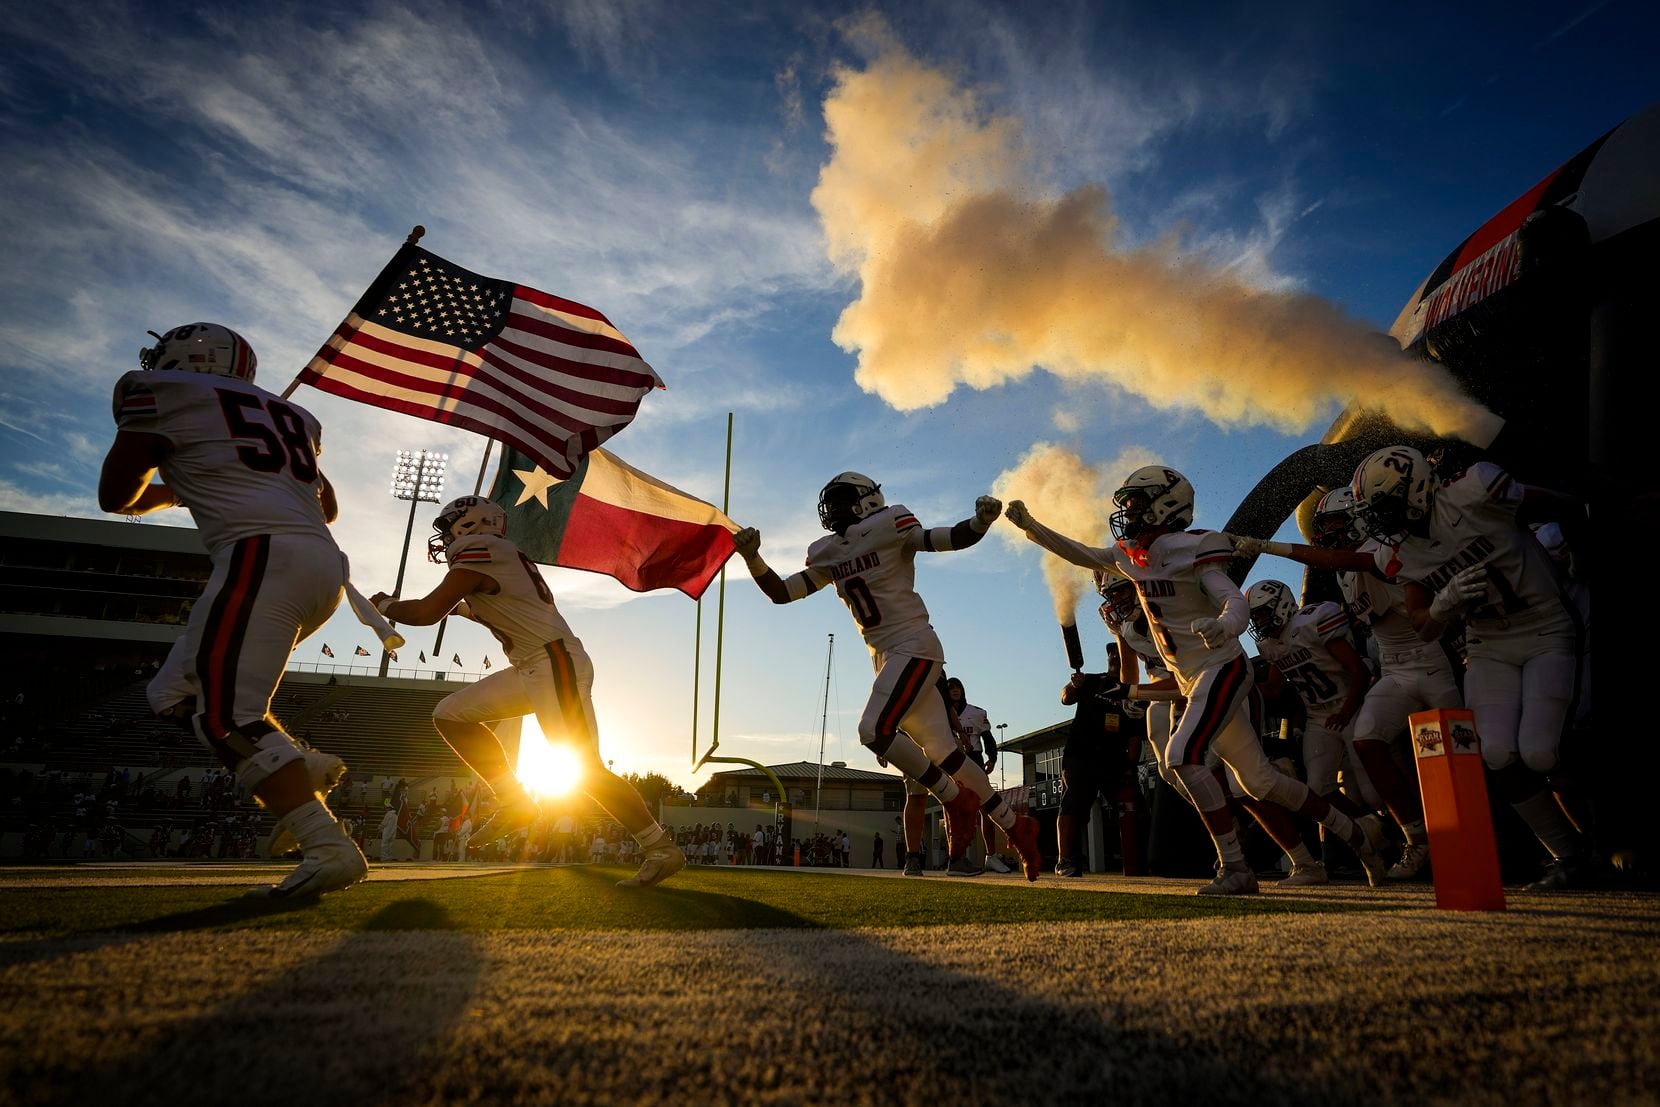 Frisco Wakeland offensive linemen Cade Myer (58) and Jack Jones (60) carried flags as they lead their team onto the field to face Denton Ryan in a District 5-5A high school football game Sept. 23 at the C.H. Collins Complex in Denton. 